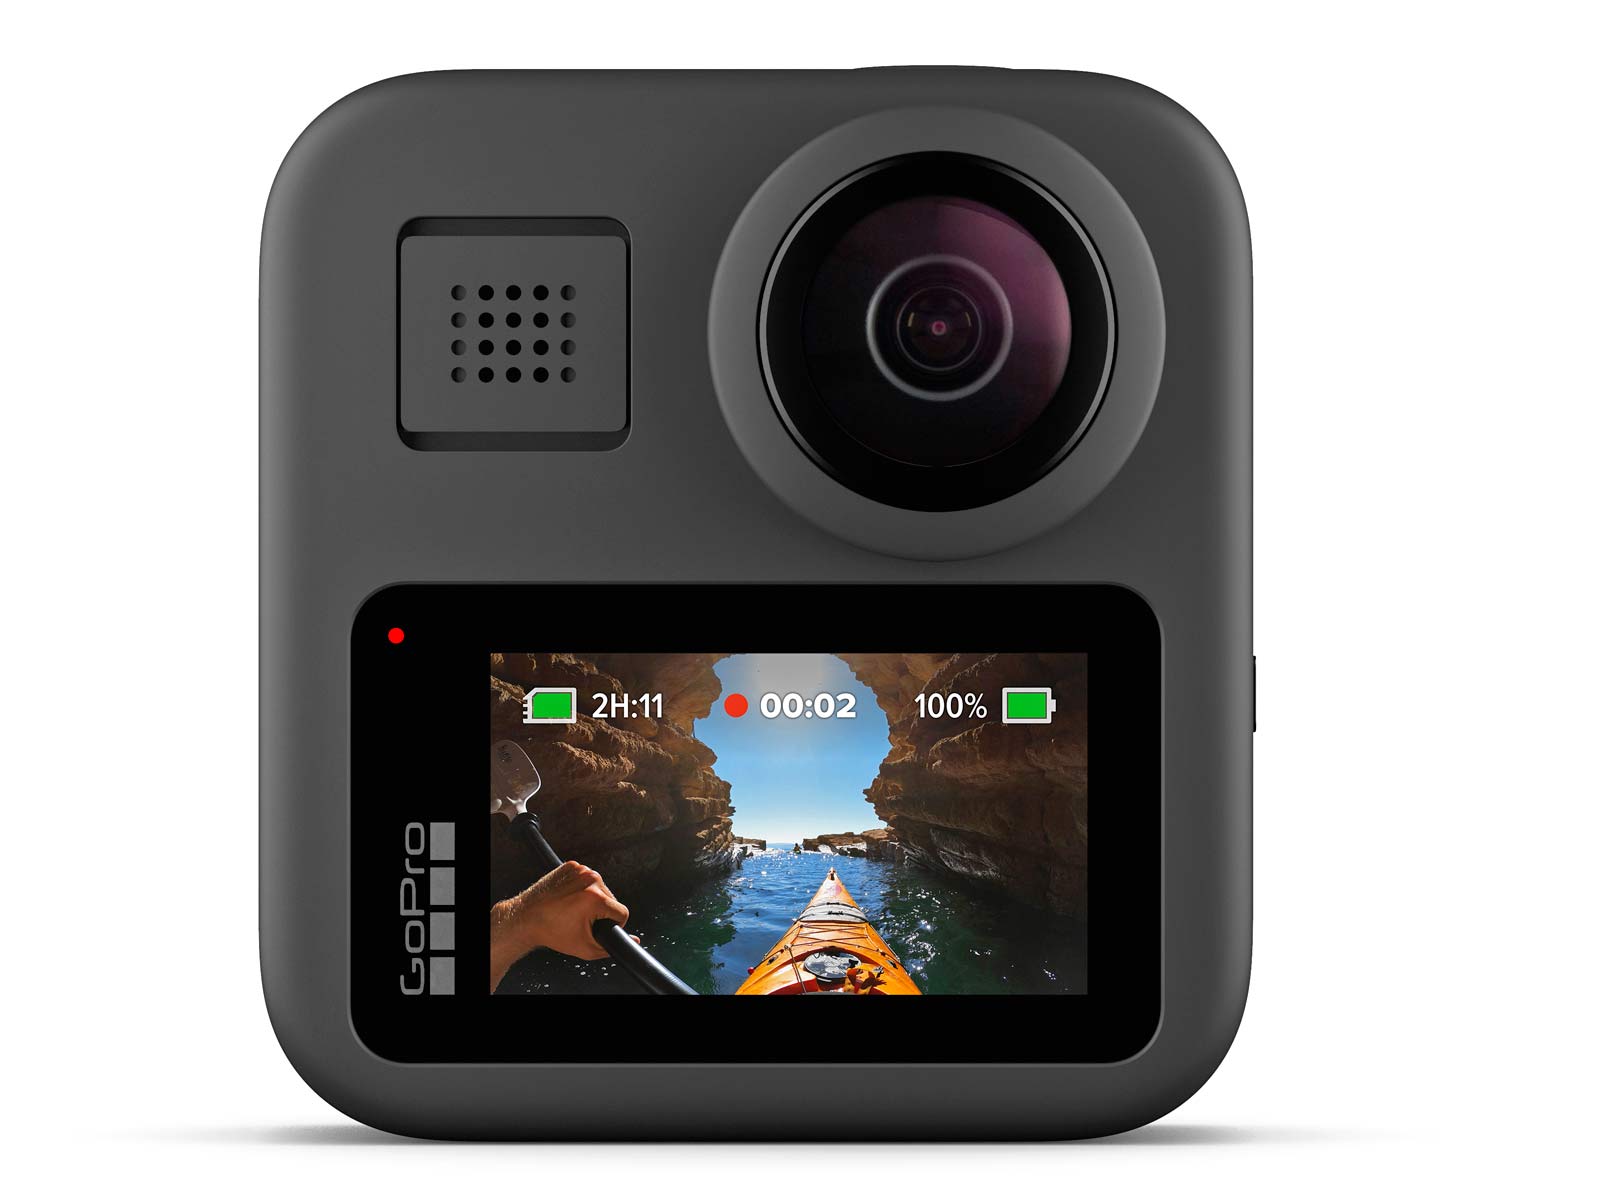 GoPro Max shoots 360 video, but that's not the reason to get it - CNET